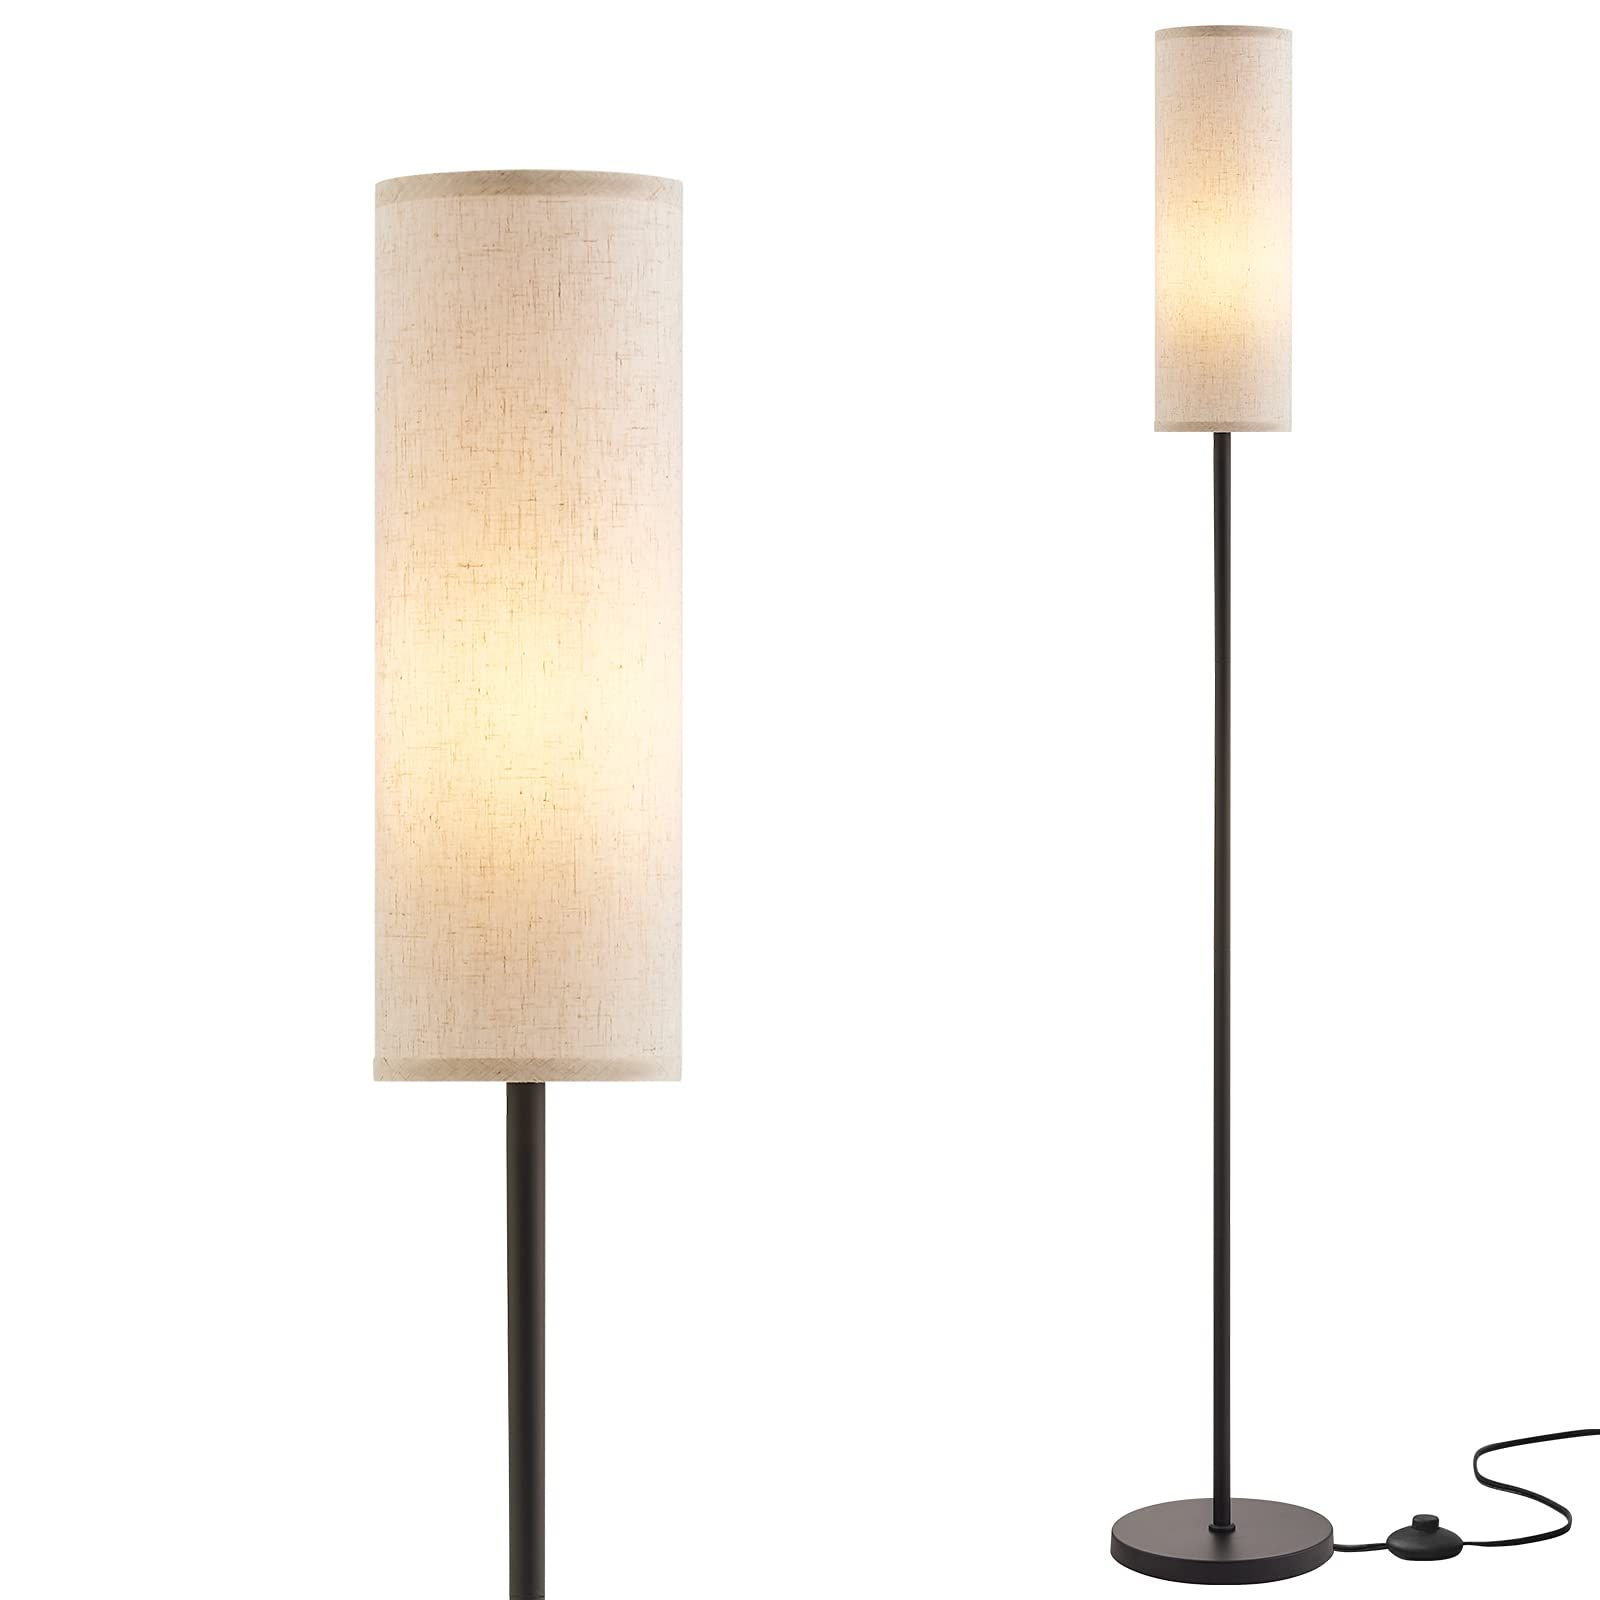 2019 Ambimall Floor Lamp For Living Room Modern – Pole Lamps For Bedrooms Tall,  Modern Standing Lamps With Pertaining To Minimalist Standing Lamps (View 2 of 10)